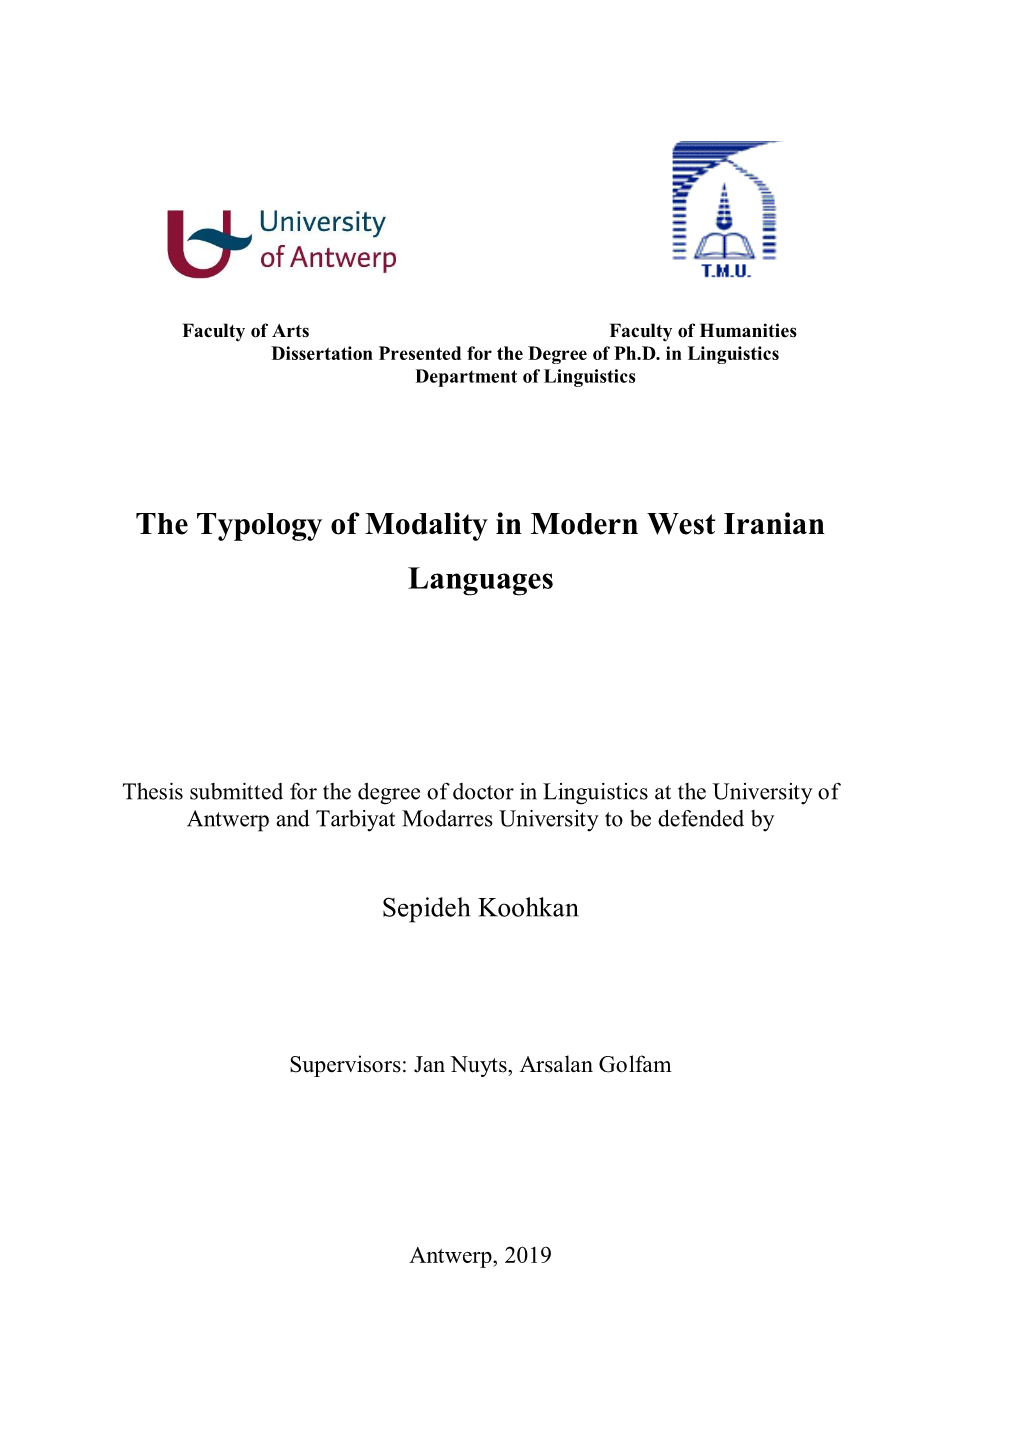 The Typology of Modality in Modern West Iranian Languages